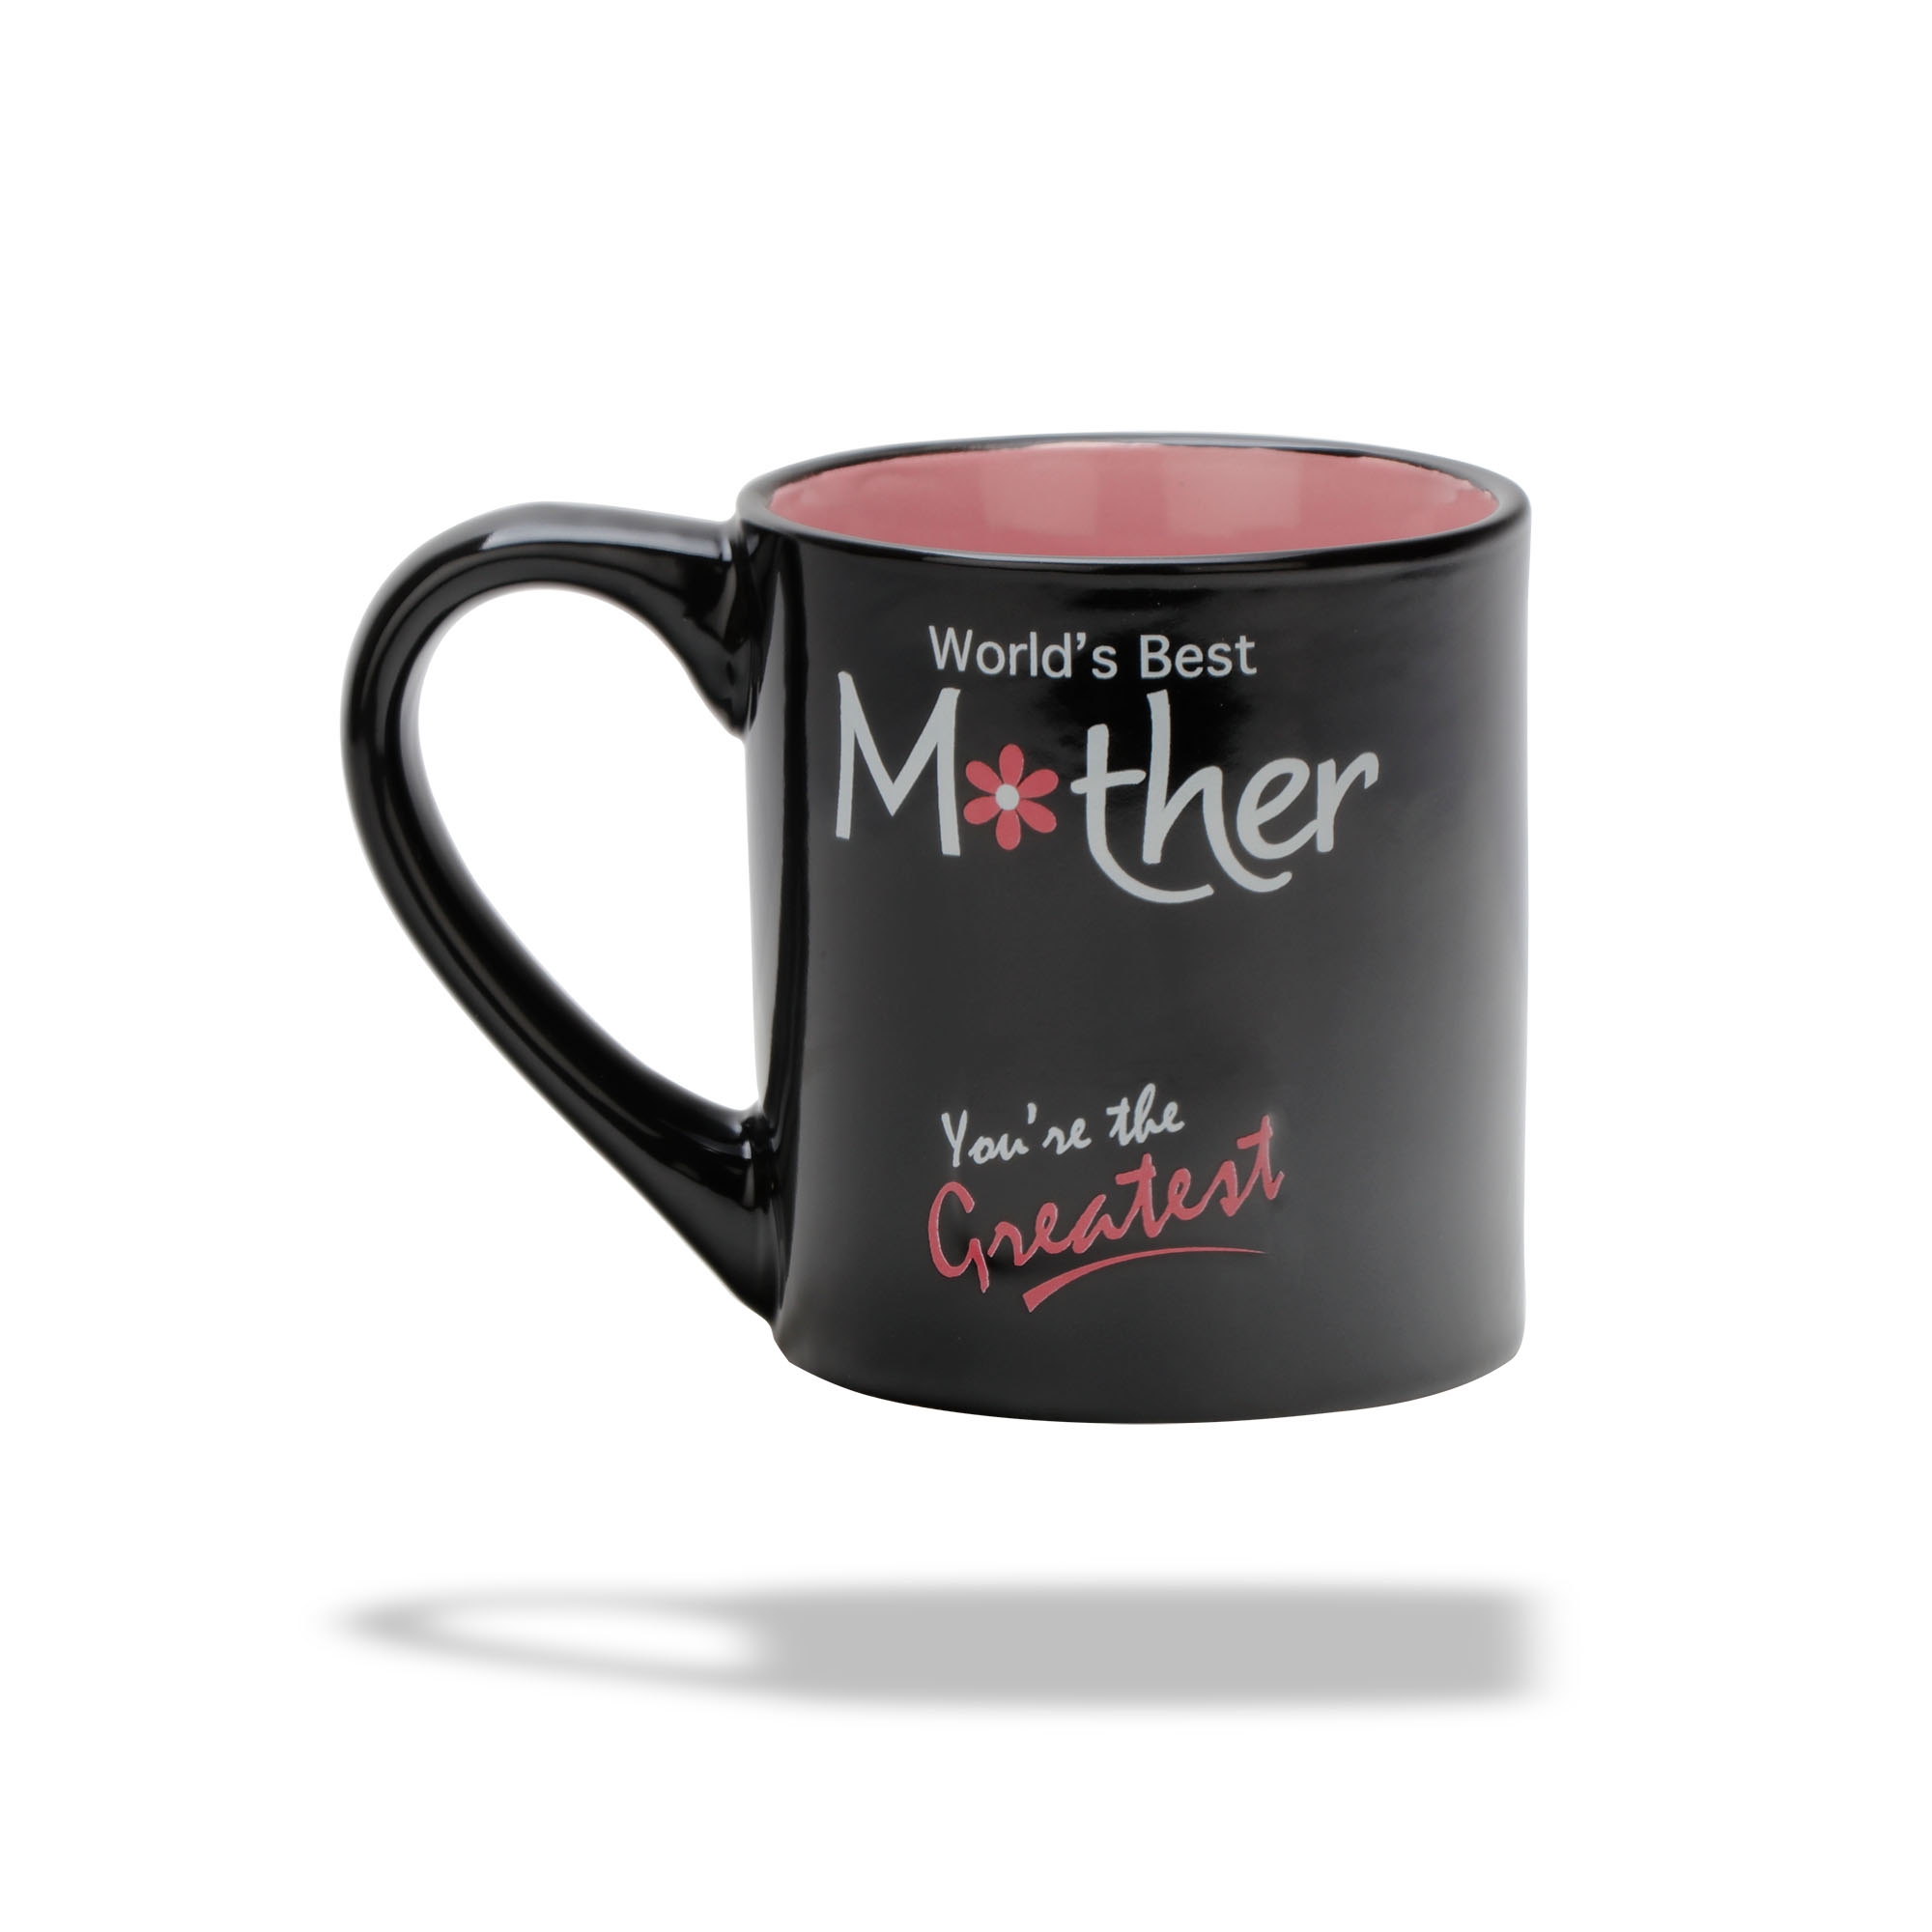 Archies | ARCHIES CERAMIC COFFEE MUG WITH WORLD'S BEST MOTHER PRINTED 